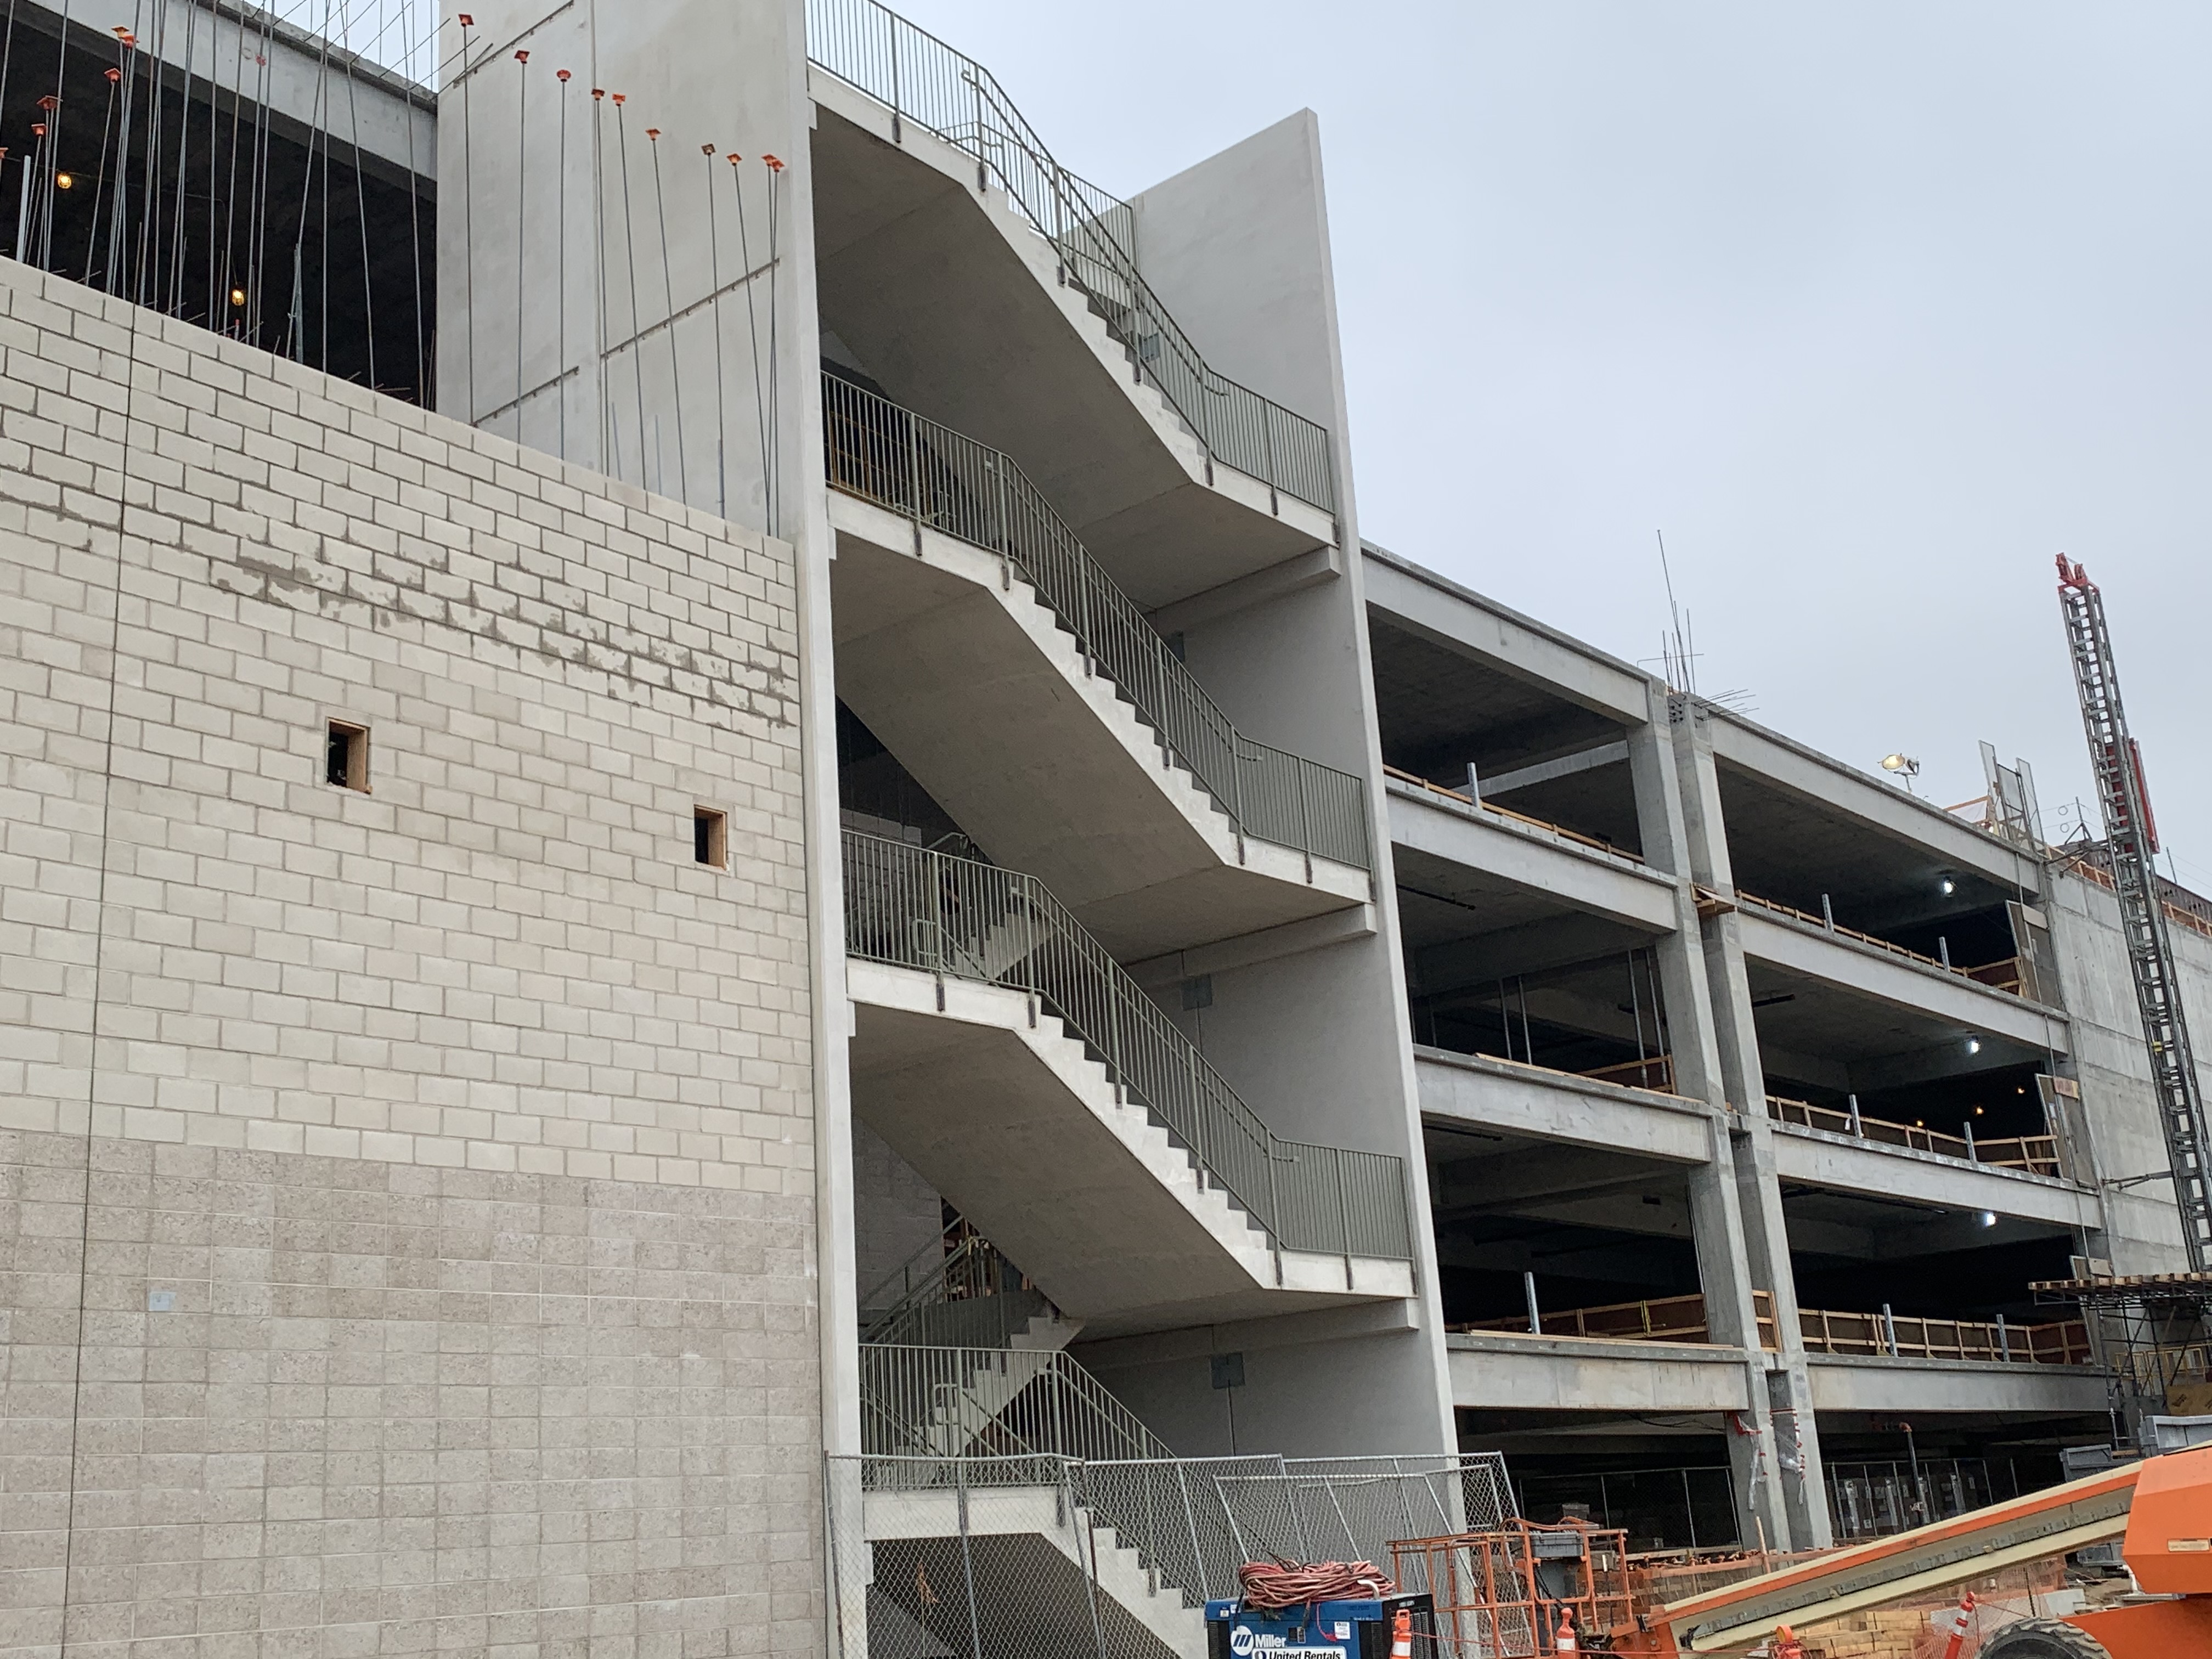 Railing installation on the precast stairs at the Consolidated Rent-A-Car facility’s Ready Return building.